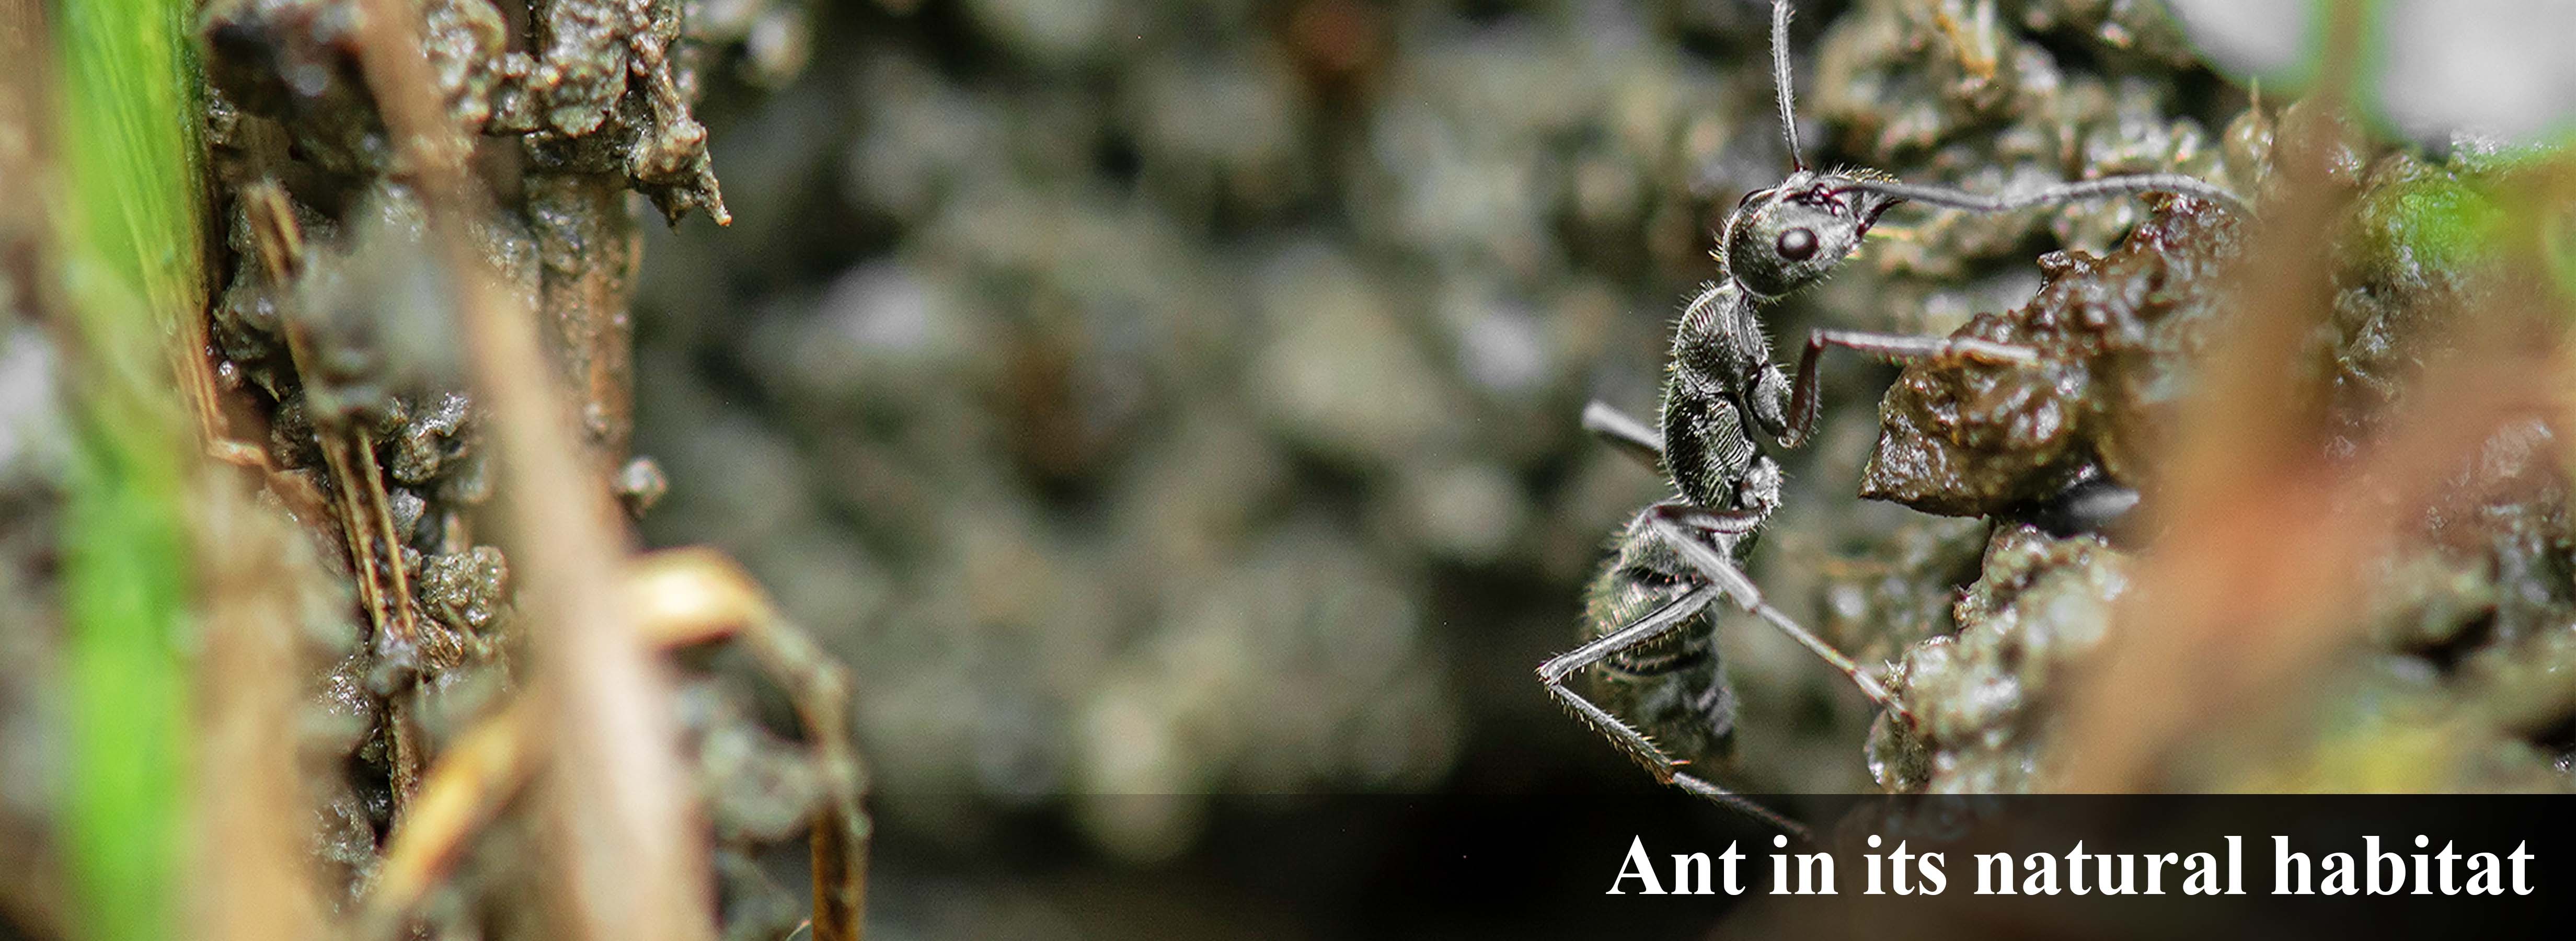 Ant-in-nature